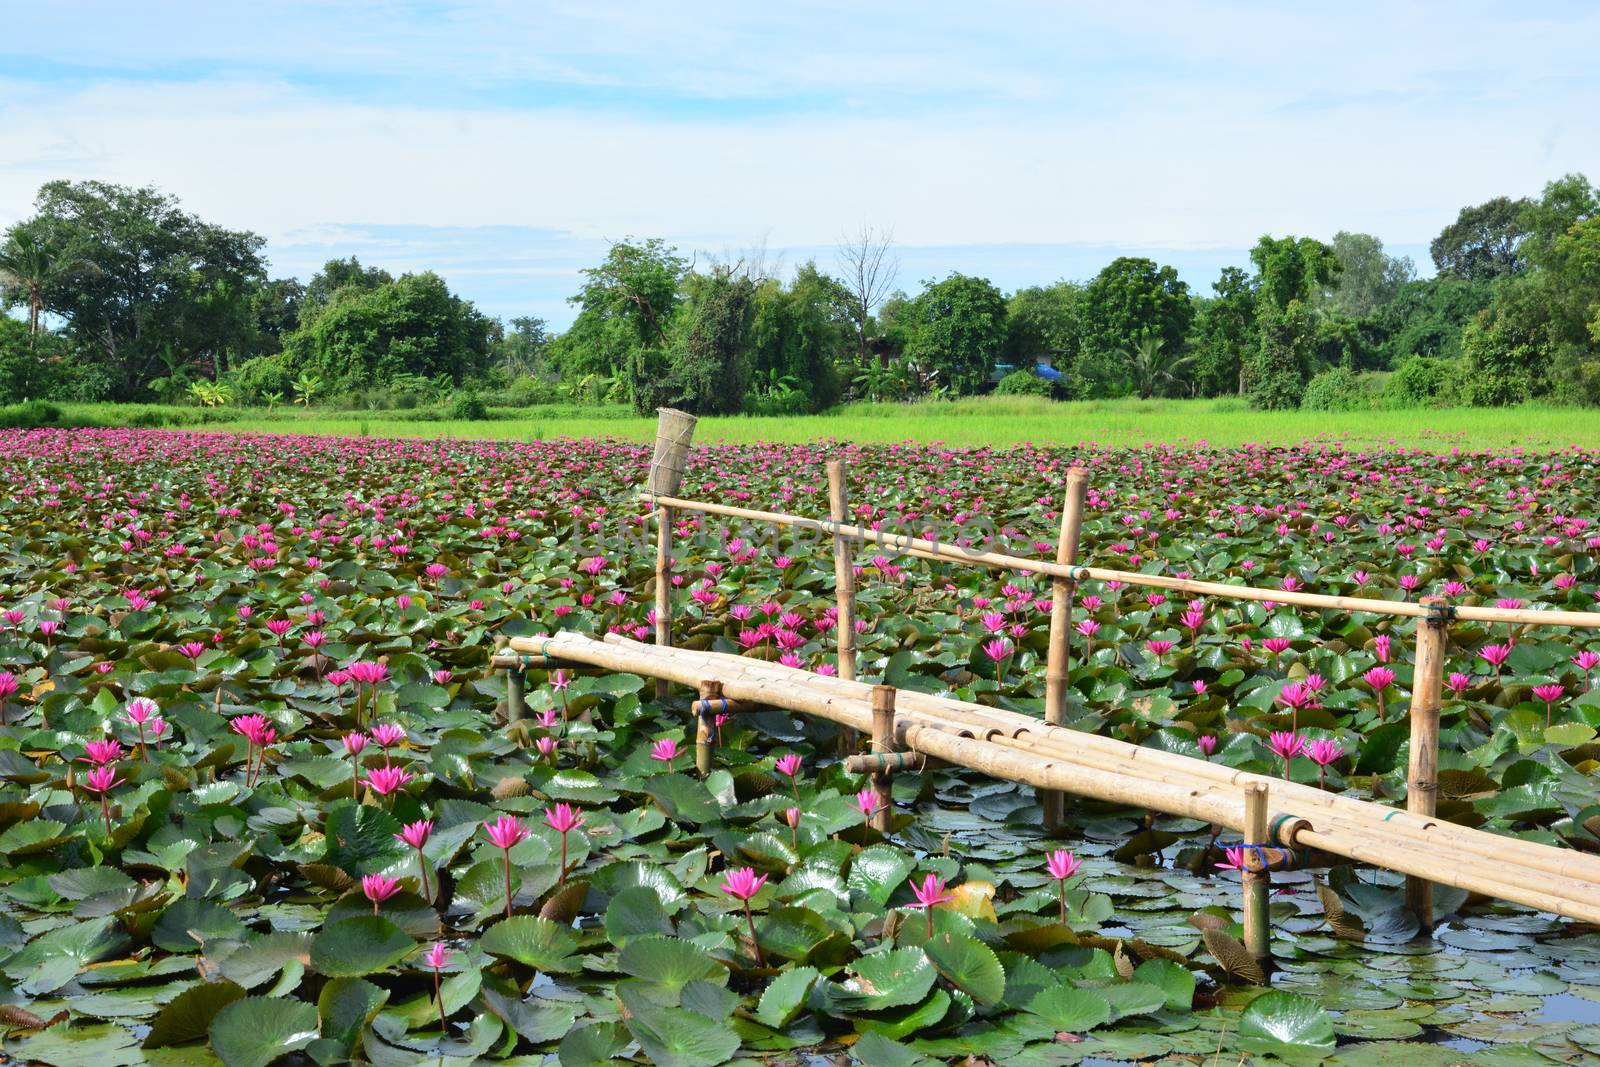 Red Lotus Sea or talay bua daeng by ideation90